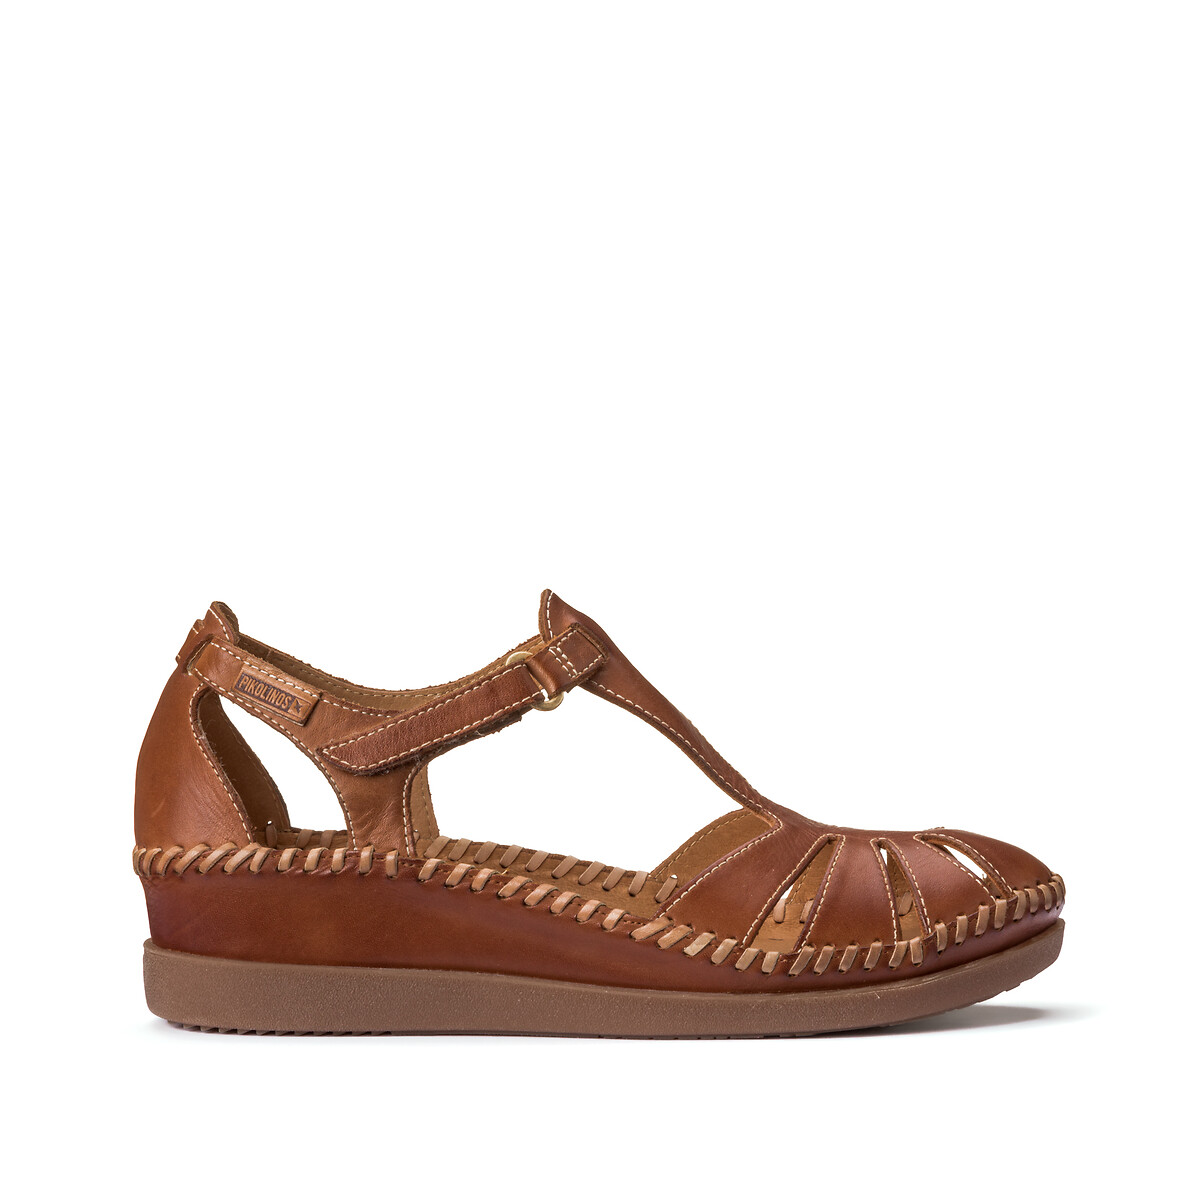 Cadaques Leather Sandals with Wedge Heel